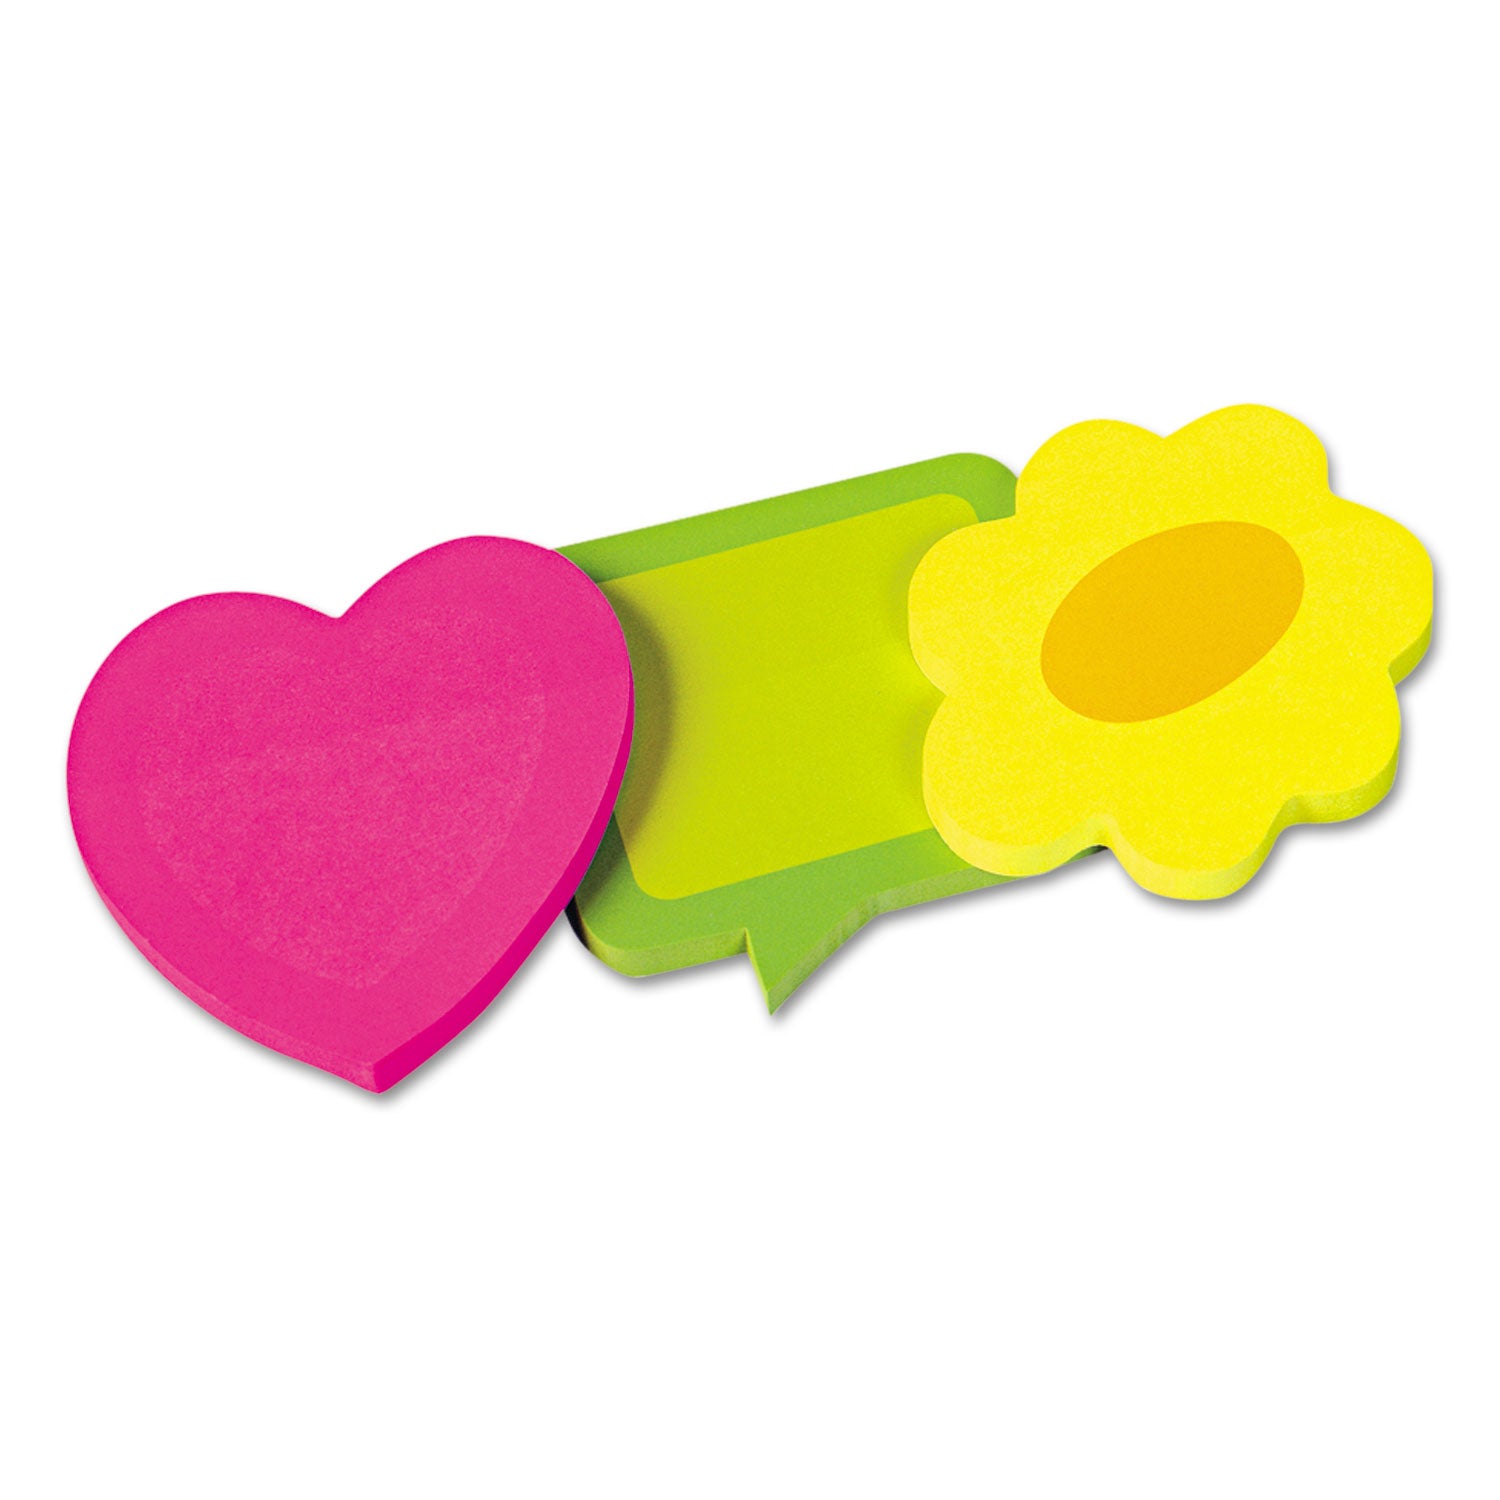 Two-Tone Sticky Note Combo, Thought Bubbles-Flowers-Hearts, Approx. 2.63 sq in, Assorted Colors, 50 Sheets/Pad, 3 Pads/Pack - 